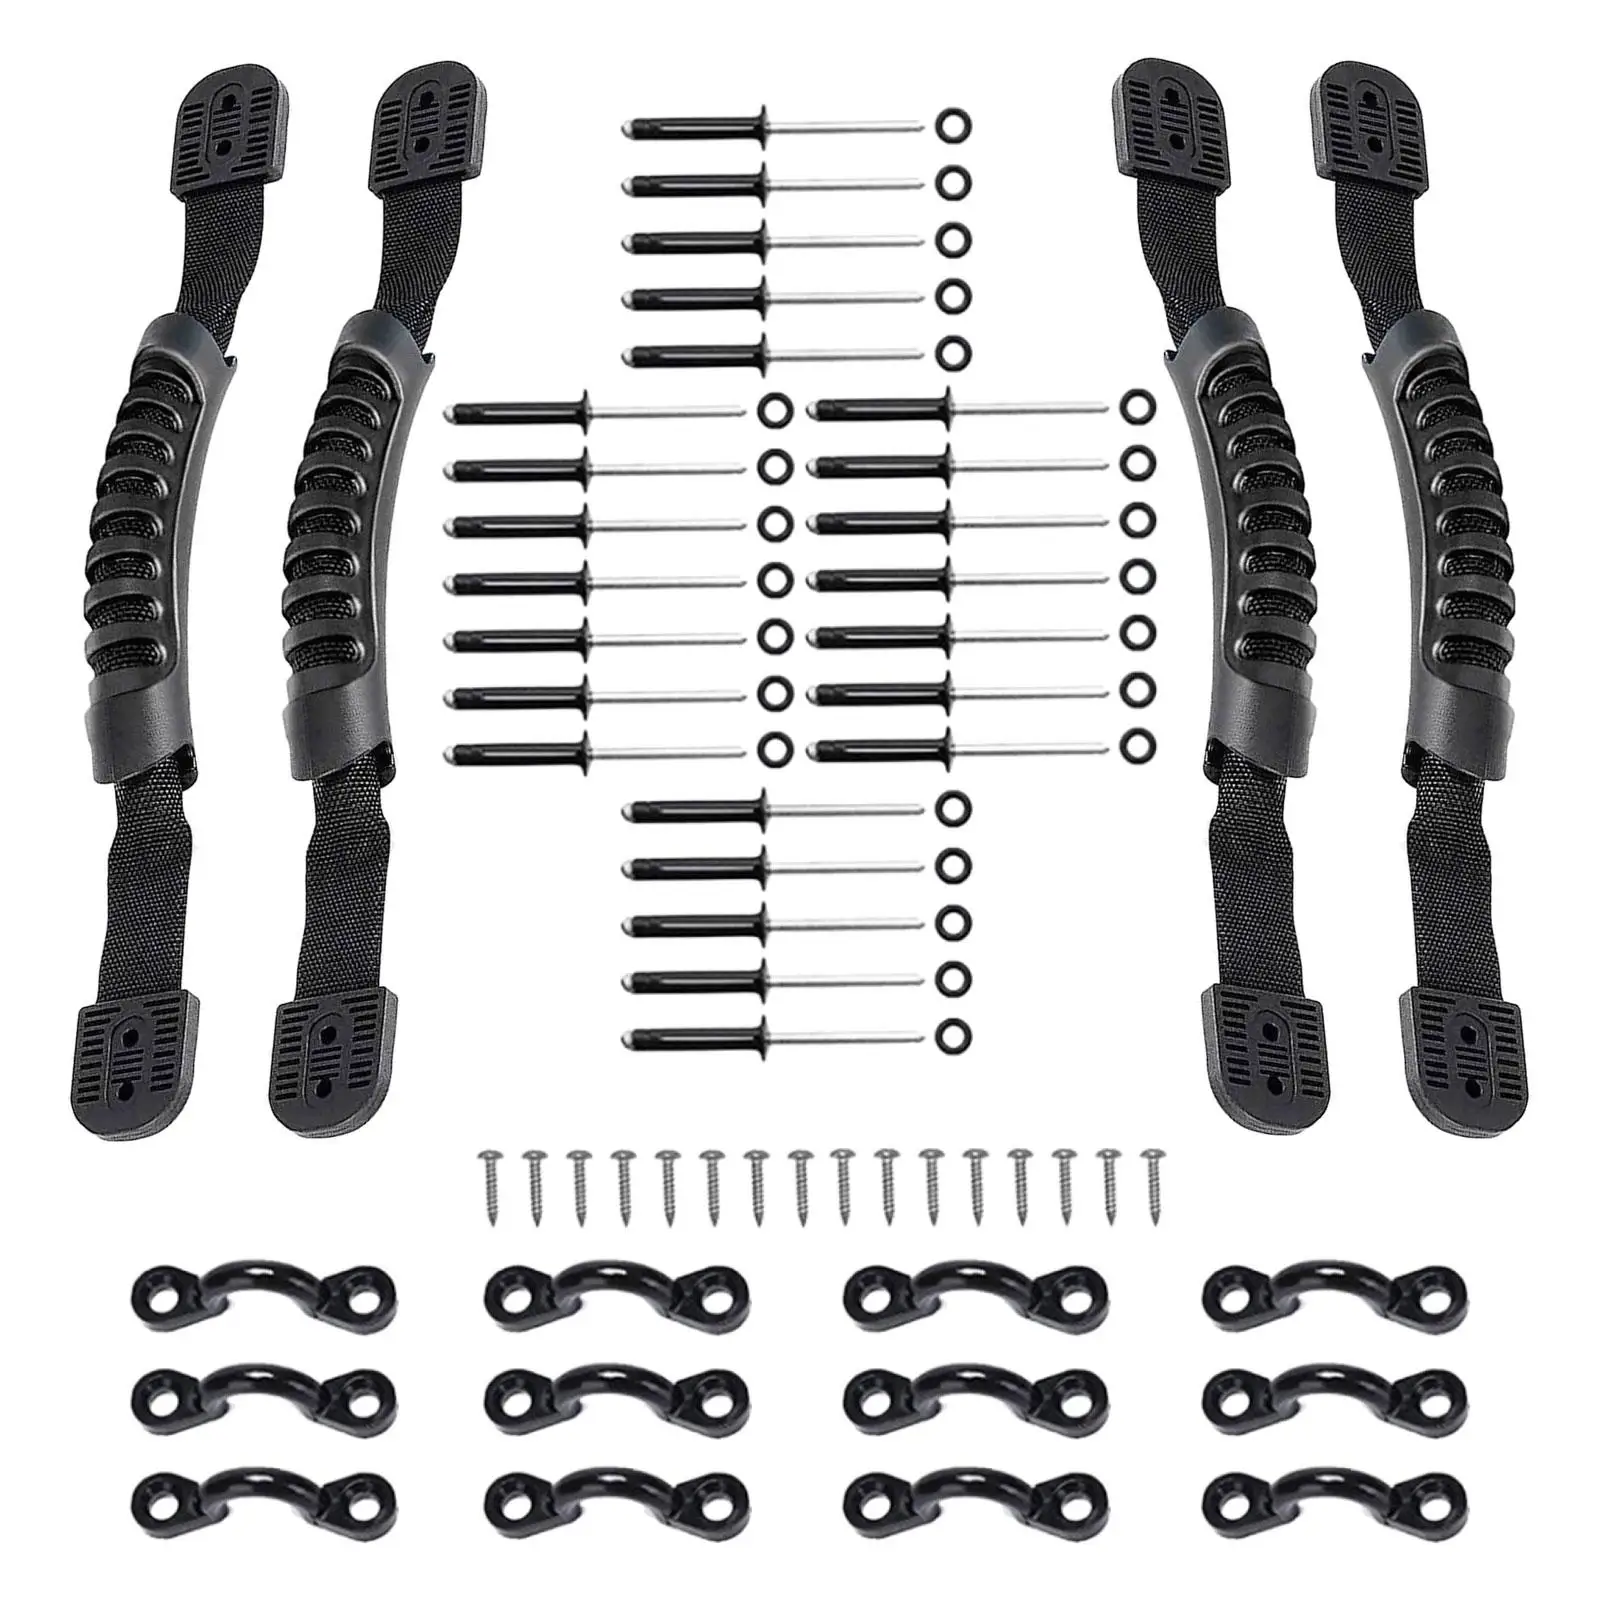 Kayak Handles with Screws Durable Kayak Carry Replacement Handles Side Mount Carry Handles for Canoe Outdoor Kayak Luggage Parts